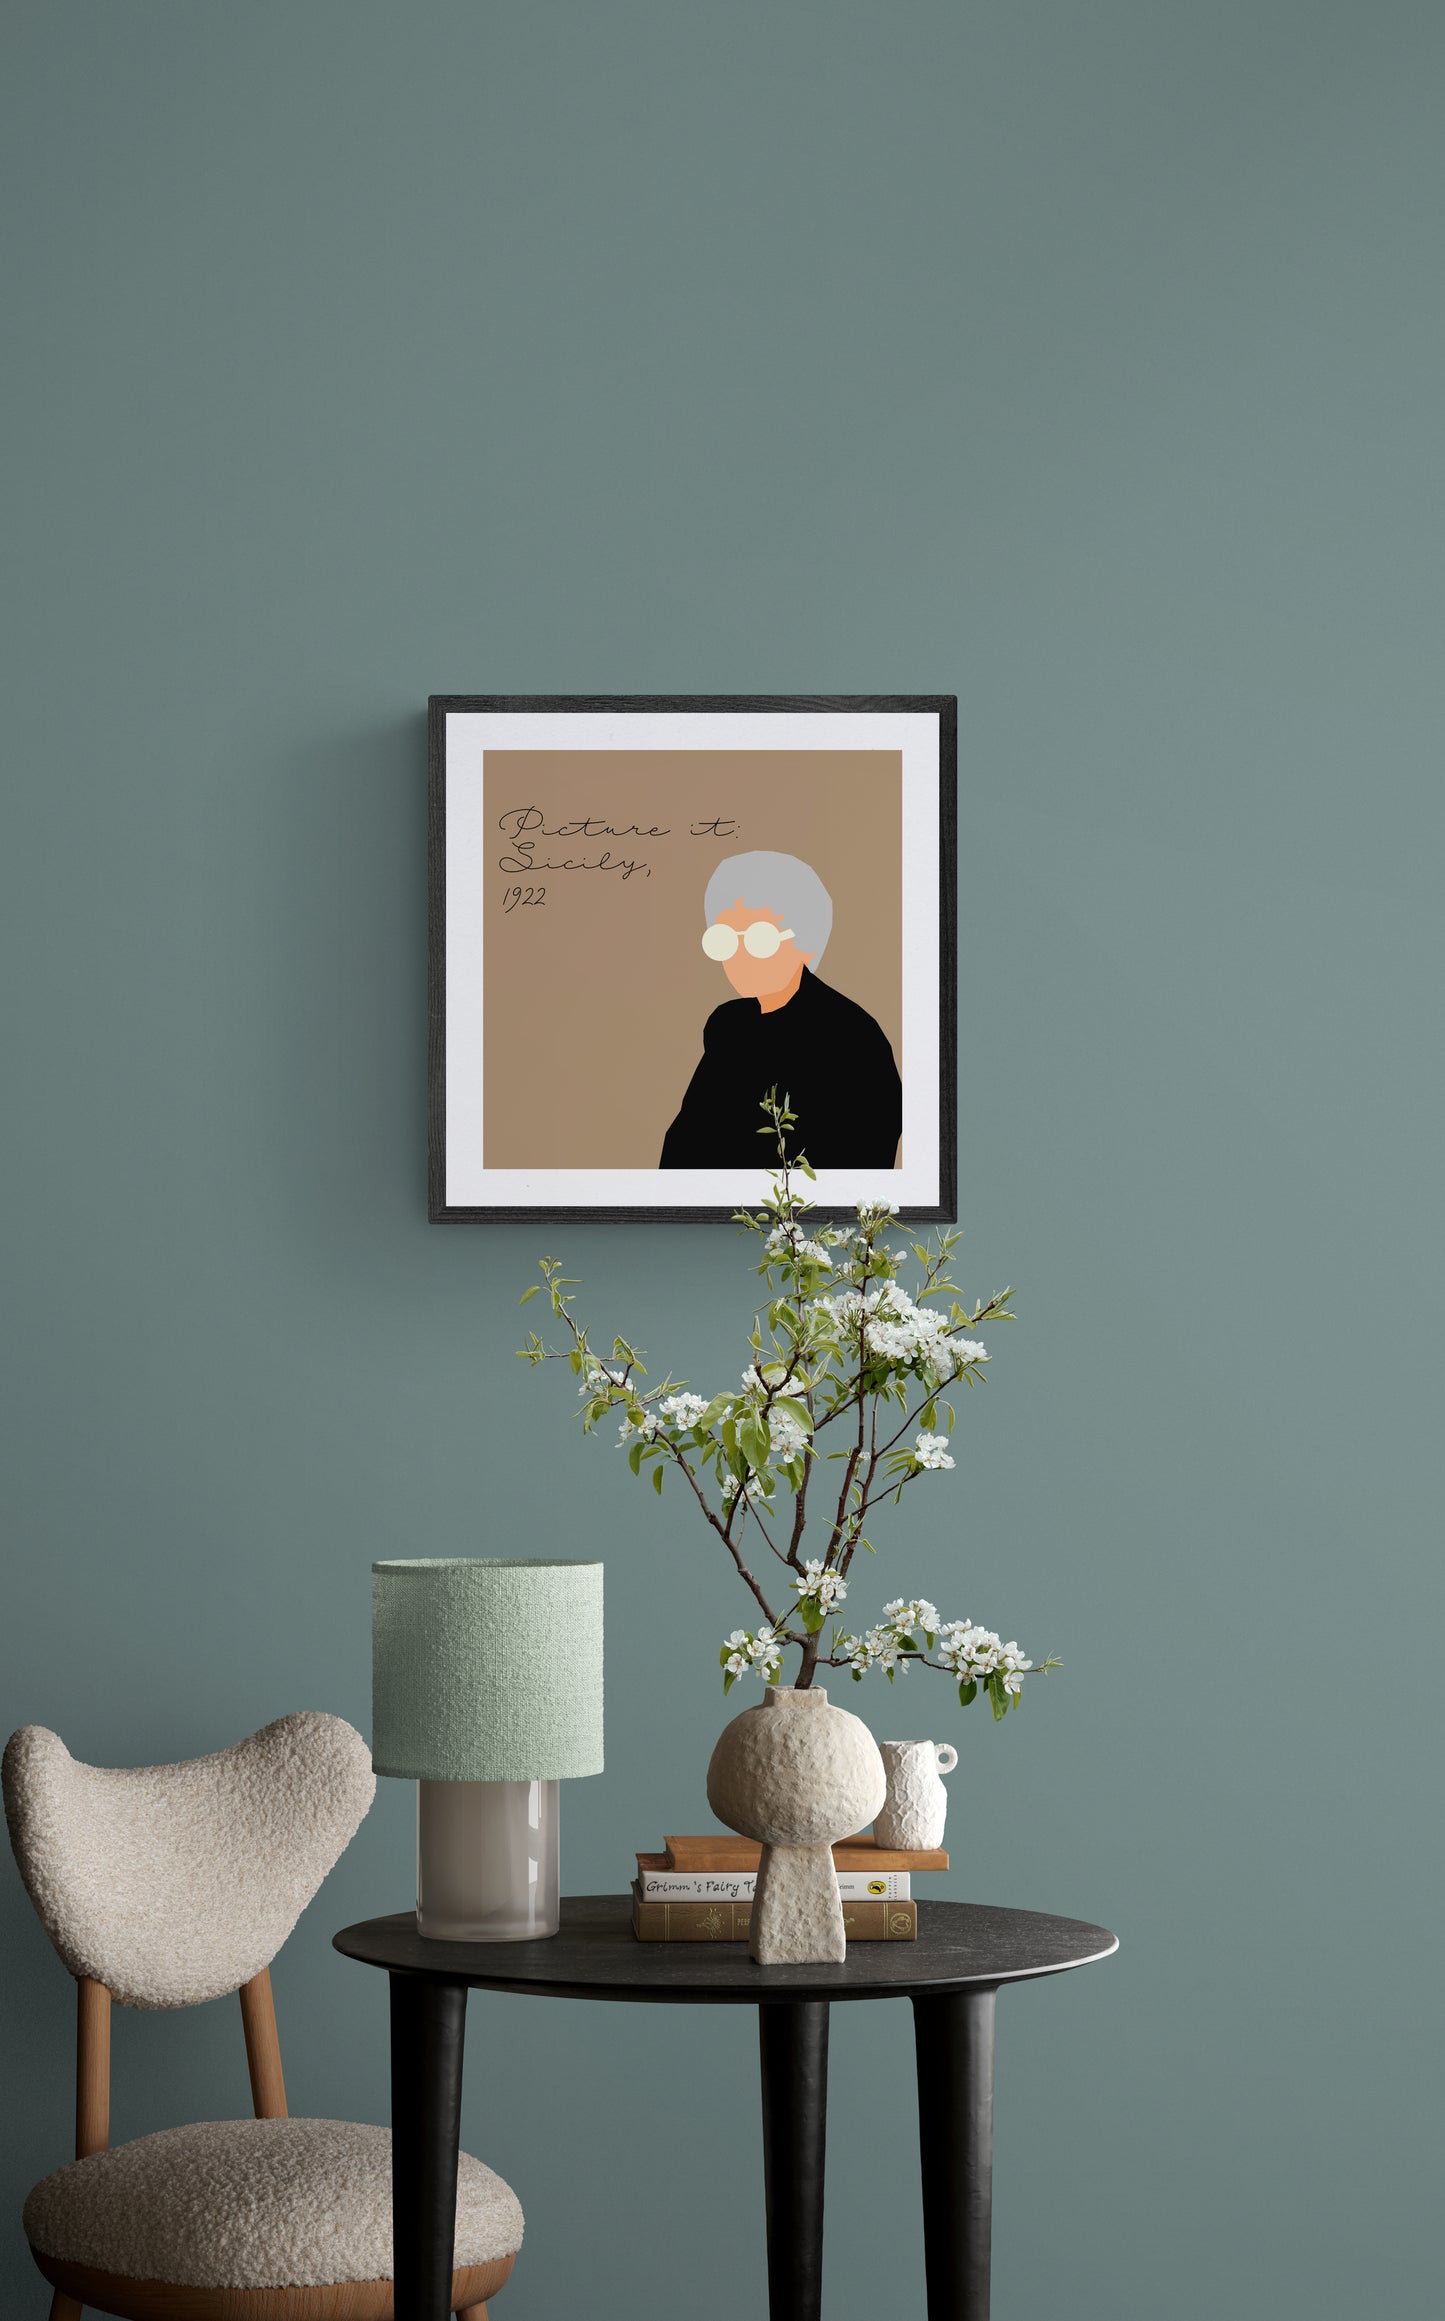 "Picture it: Sicily, 1922" Sophia Petrillo portrait with funny quote from Golden Girls tv show